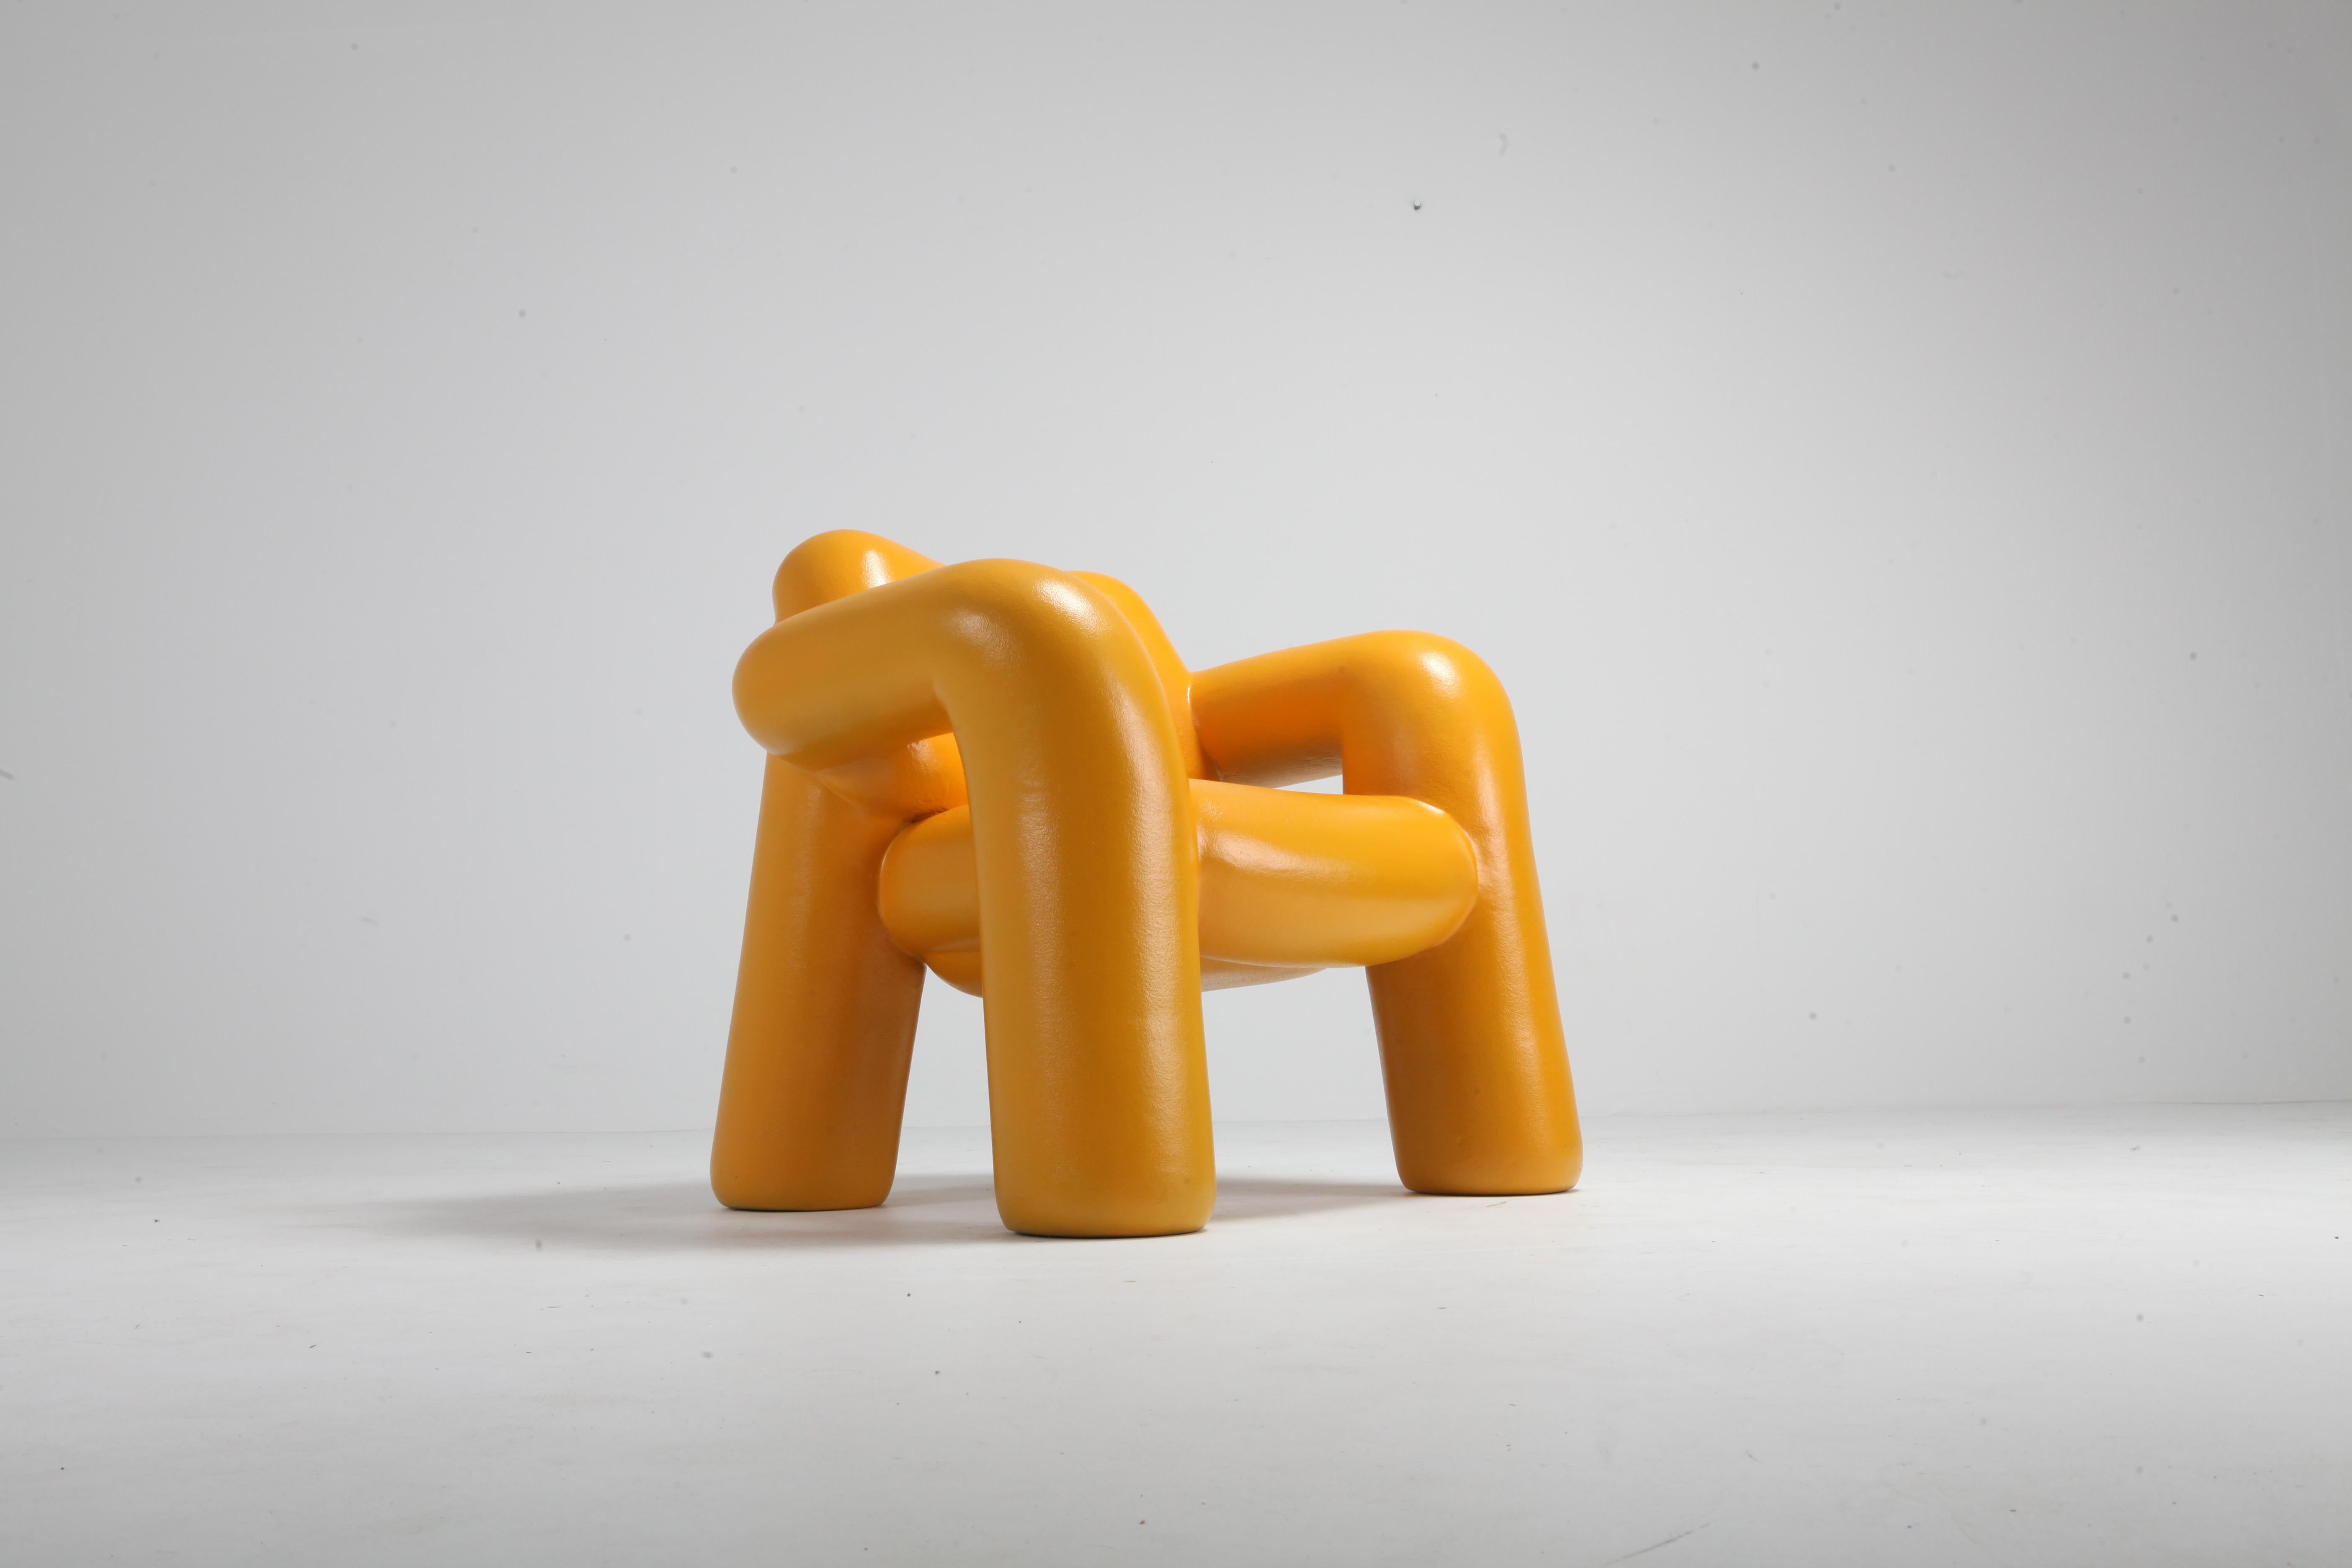 Blown-up chair (sun yellow, 2018)
Sizes: Width 89 cm, depth 79 cm, height 80 cm
Production method: 3D printed with robot arm material: recycled plastic
Finish/color: durable hard PU coating with orange peel structure edition of eight.

Schimmel